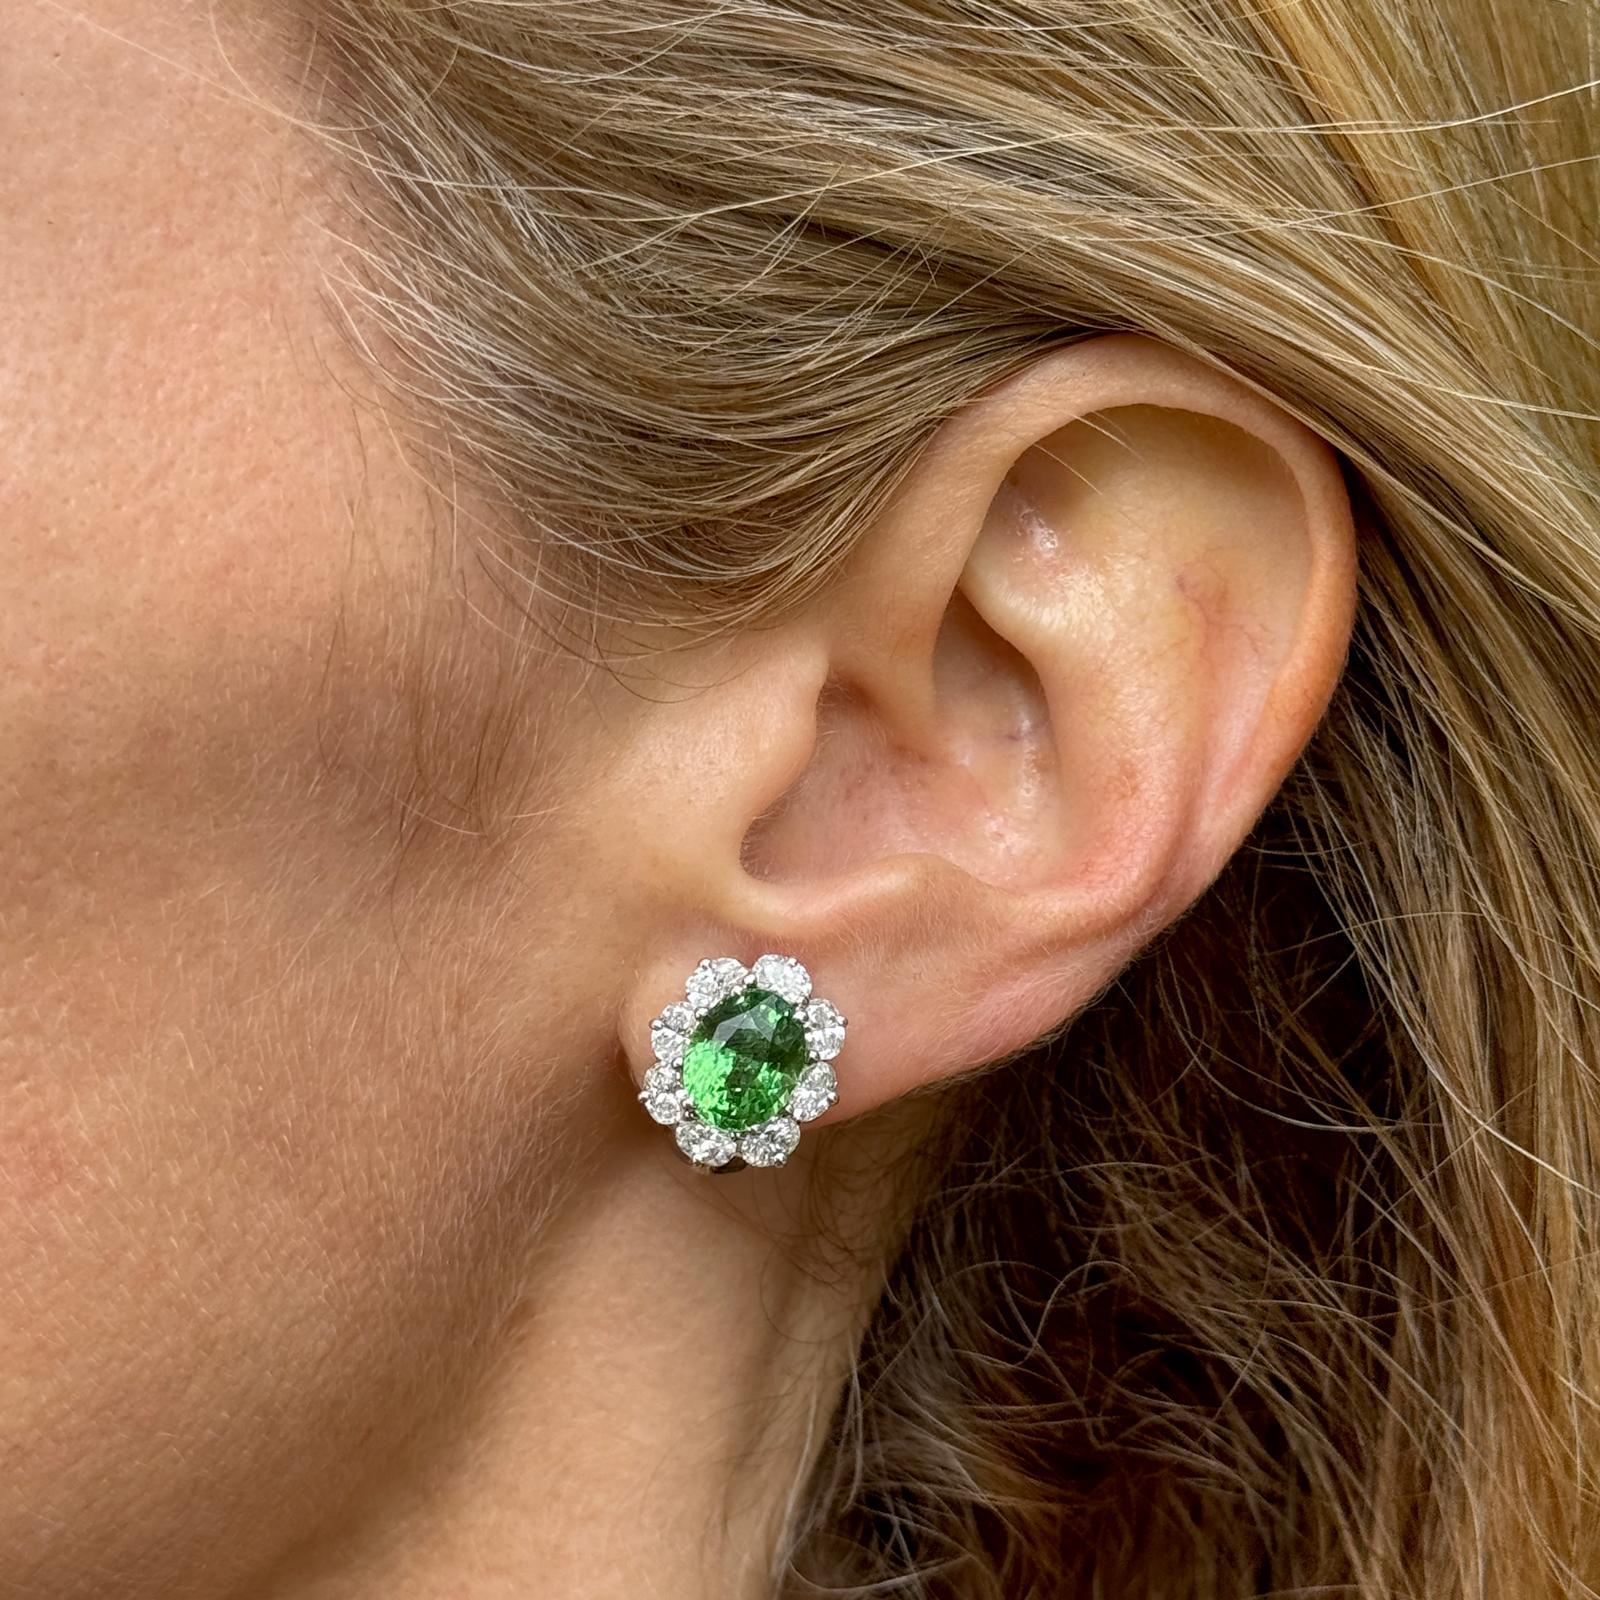 Stunning tsavorite and diamond earrings by American designer Oscar Heyman handcrafted in platinum. The earrings features 2 oval tsavorite gemstones weighing 6.15 carat total weight, and 16 oval cut diamonds weighing 2.18 CTW. The diamonds are graded